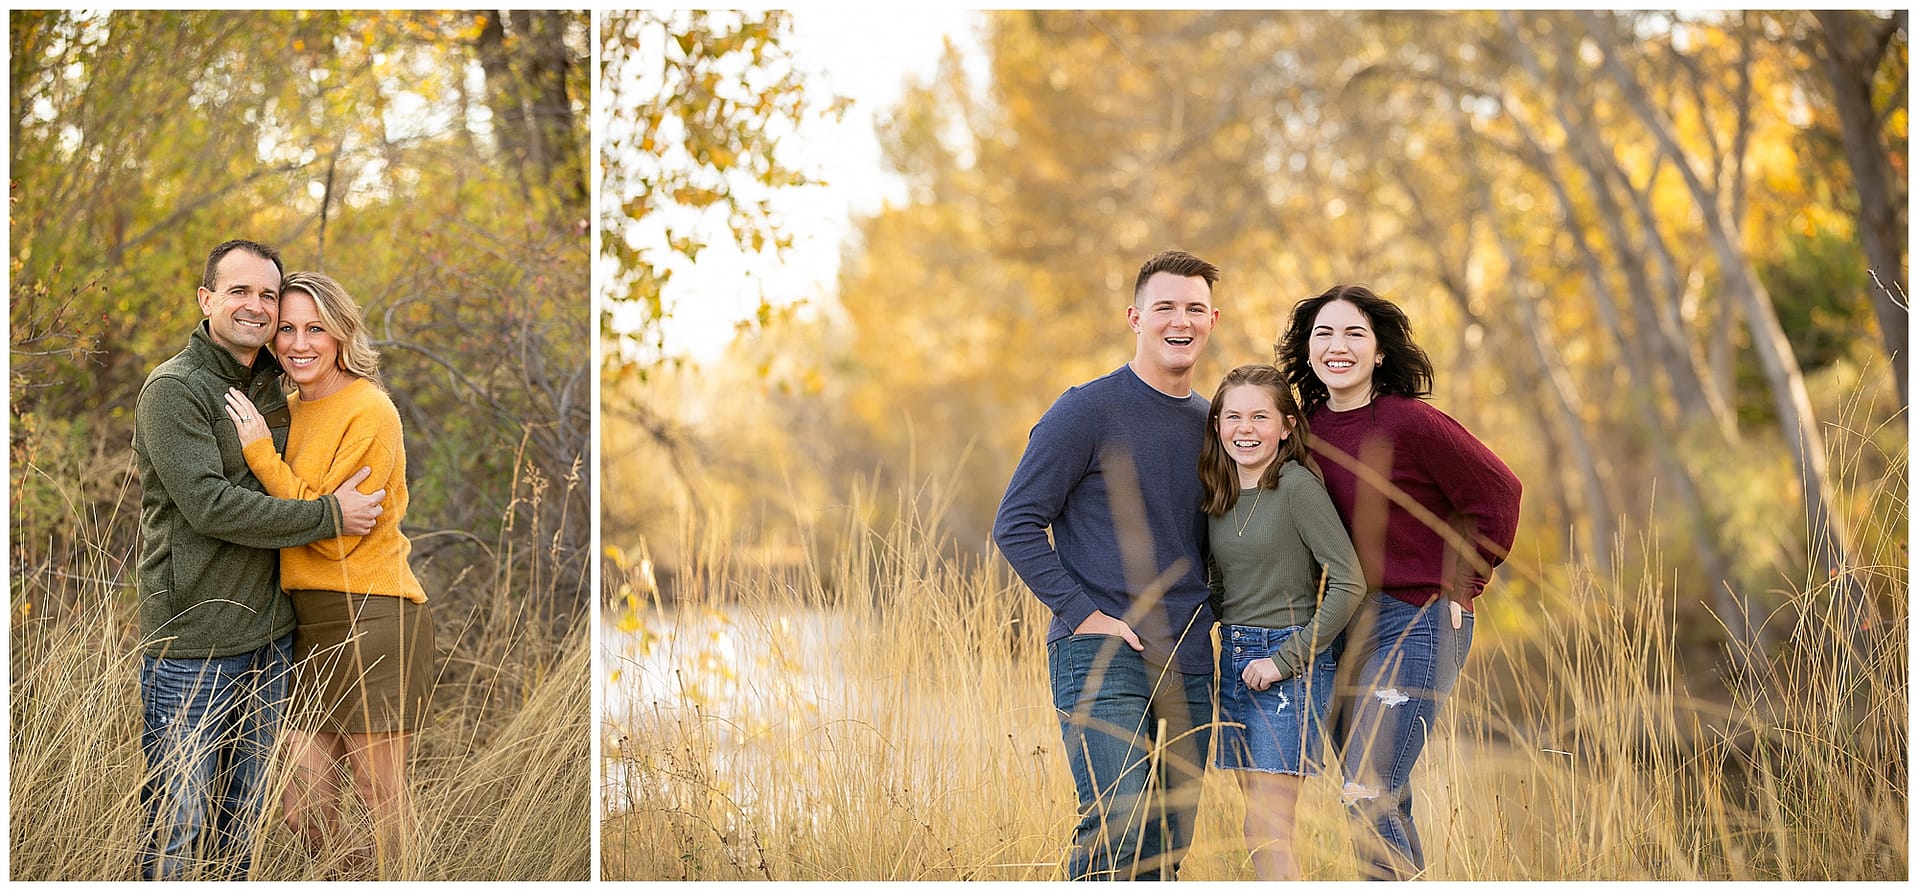 Fall Boise photos with family of five. Photo by Tiffany Hix Photography.